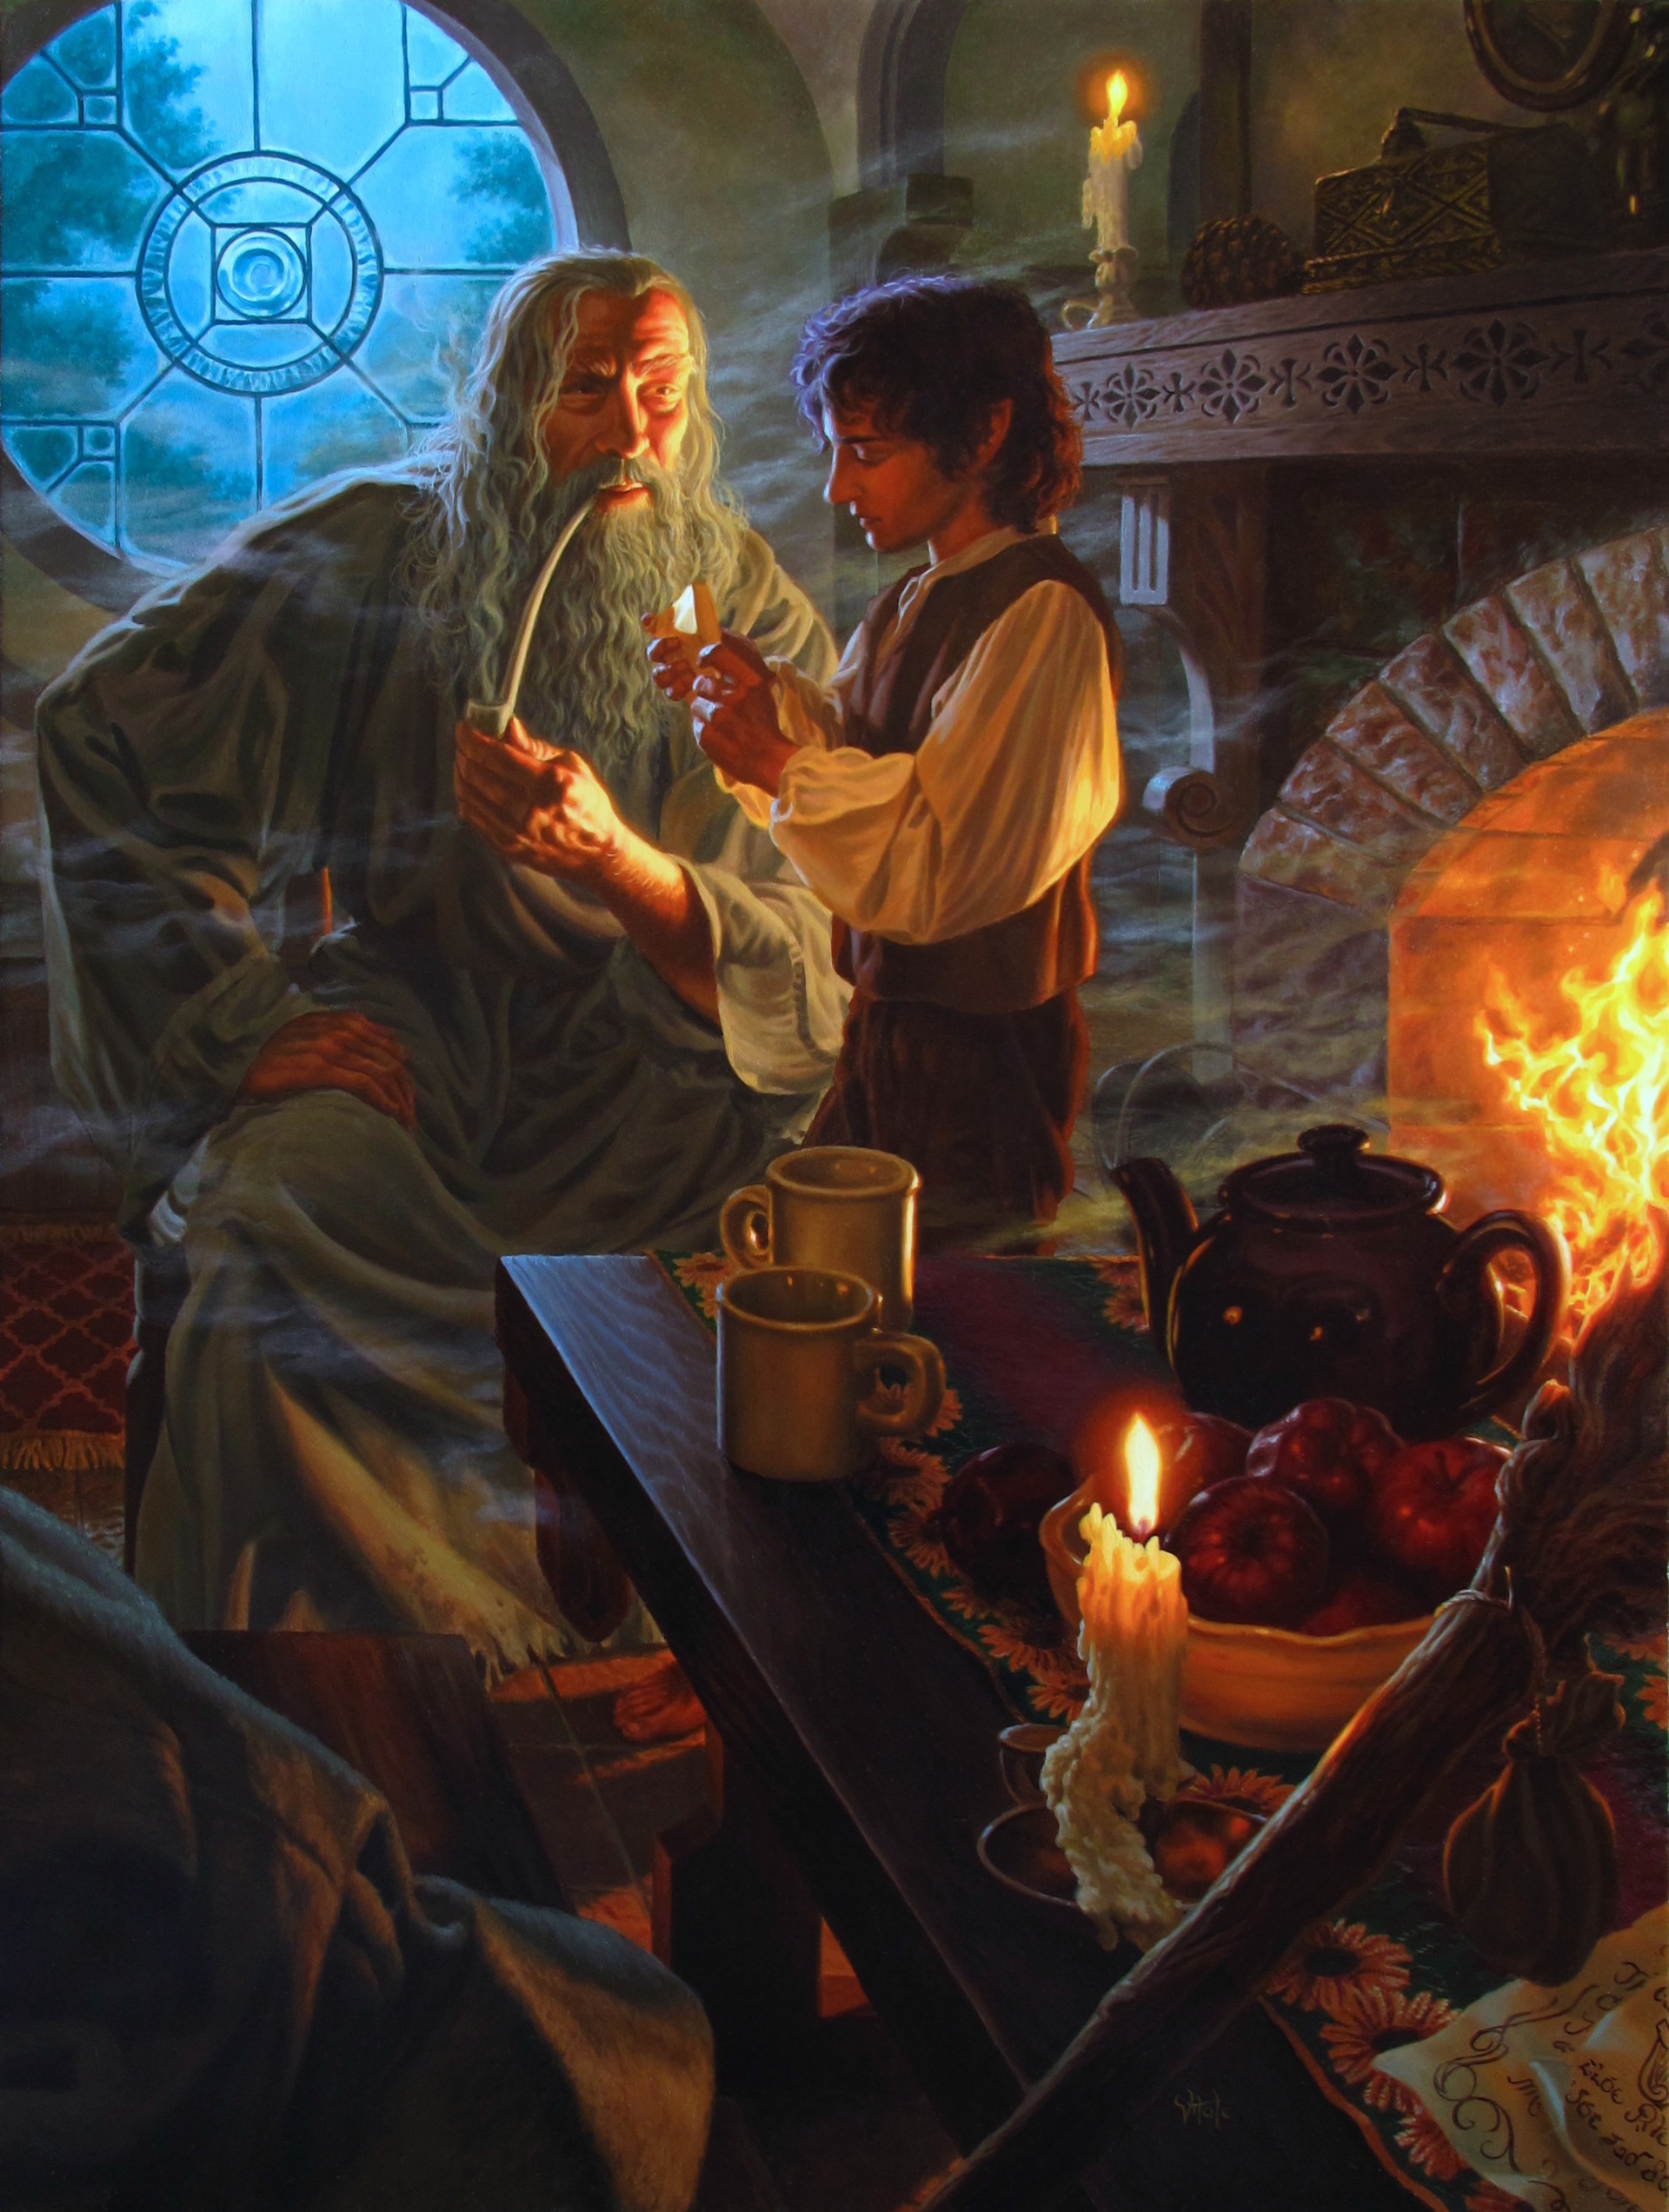 The Inheritance by Raoul Vitale